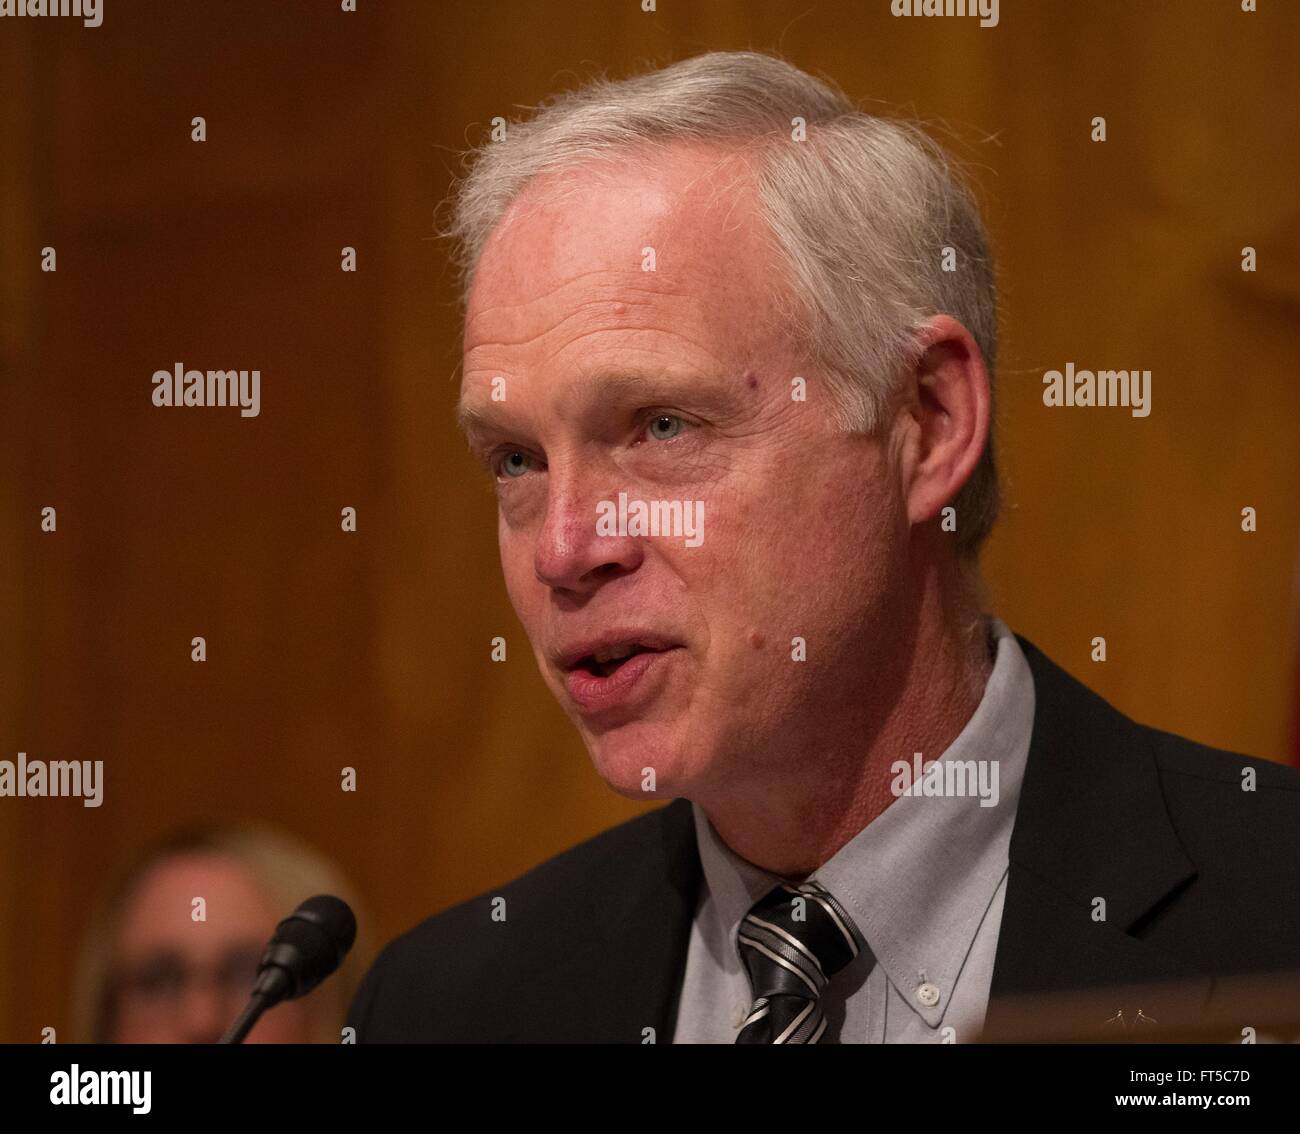 U.S. Senator Ron Johnson of Wisconsin during the Senate Appropriations Subcommittee on Homeland Security hearings on Capitol Hill March 3, 2016 in Washington, D.C. Stock Photo